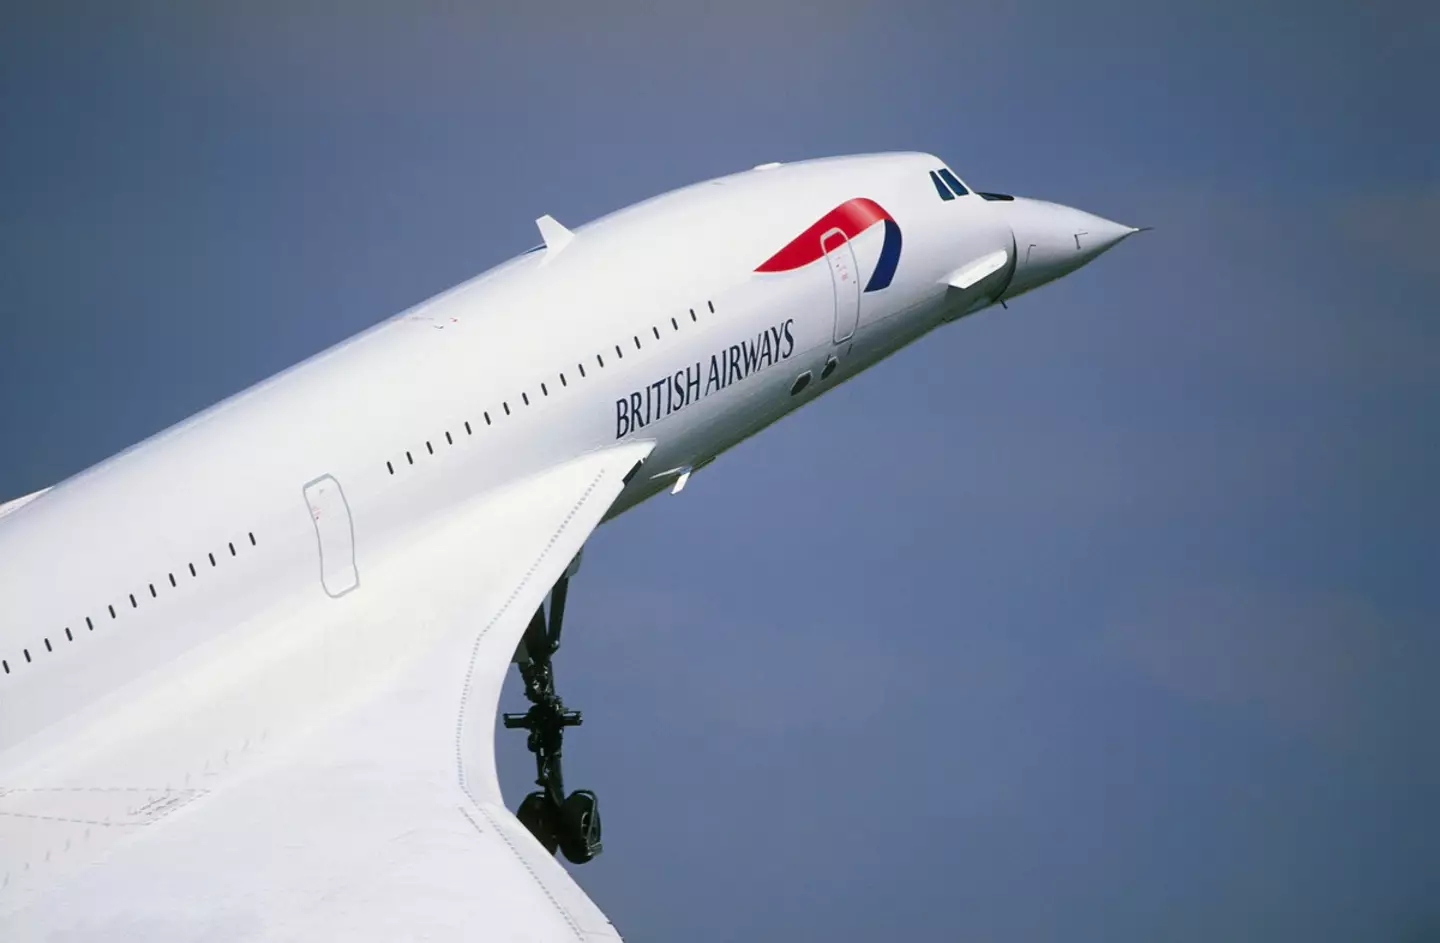 Concorde has been retired for over 15 years now.